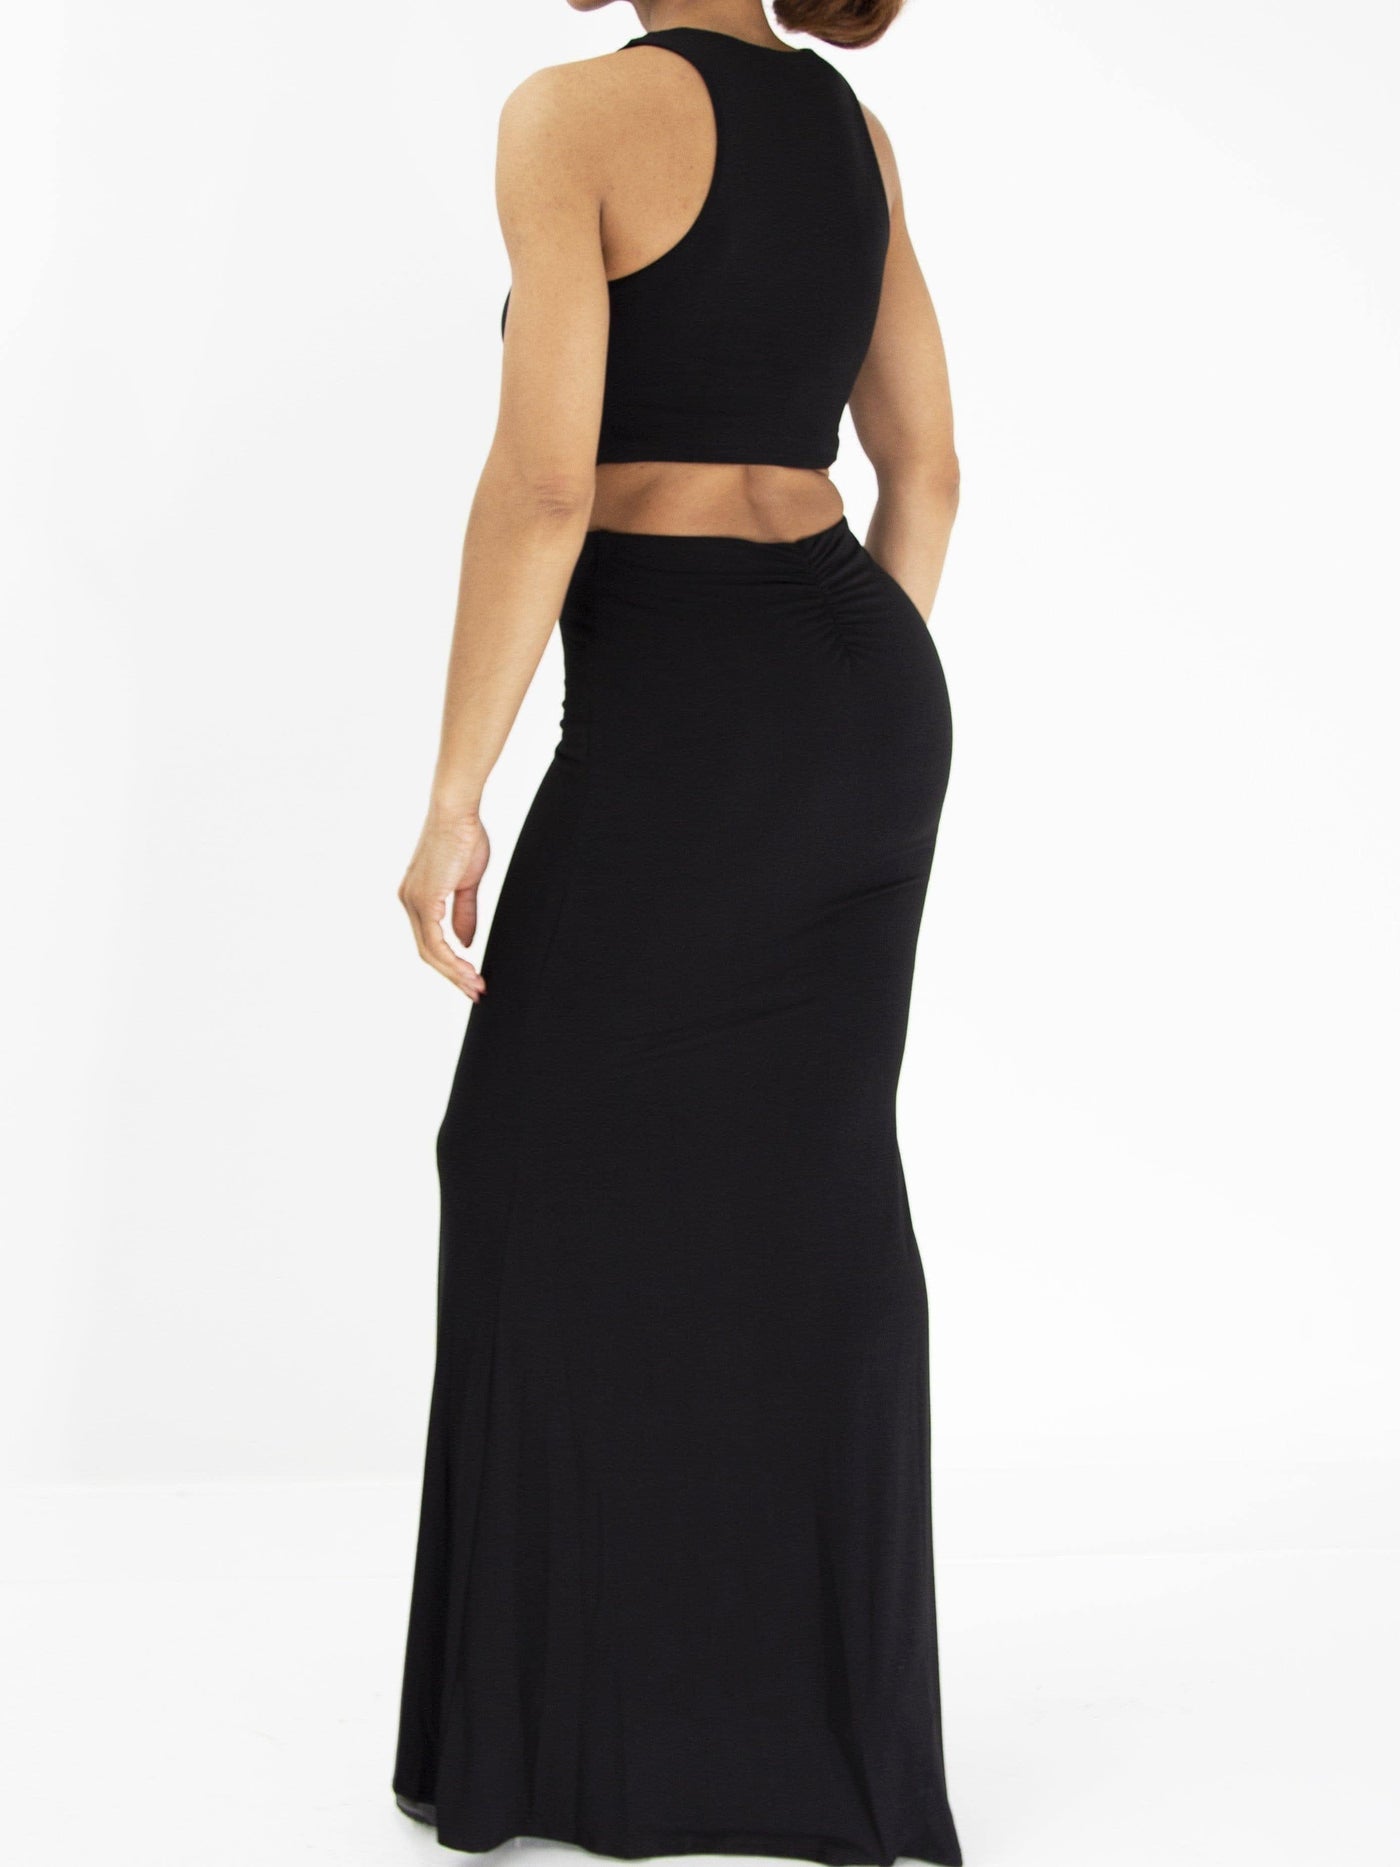 The Mermaid | 2 Piece Maxi Skirt Set - Statement Piece NY _tab_size-chart, Black, Brooklyn Boutique, chic, Crop Top, cute dress, cute dresses for women, dresses, Dresses & Skirts, final, final sale, Maxi Skirt, maxi skirt set, Misses, Monochrome, not clearance, ruched, Set, Sets, Ships from USA, SPNY Exclusive, statement, statement piece, Statement Piece Boutique, statement piece ny, Statement Pieces, Statement Pieces Boutique, Women's Boutique Statement Dresses/Jumpsuits